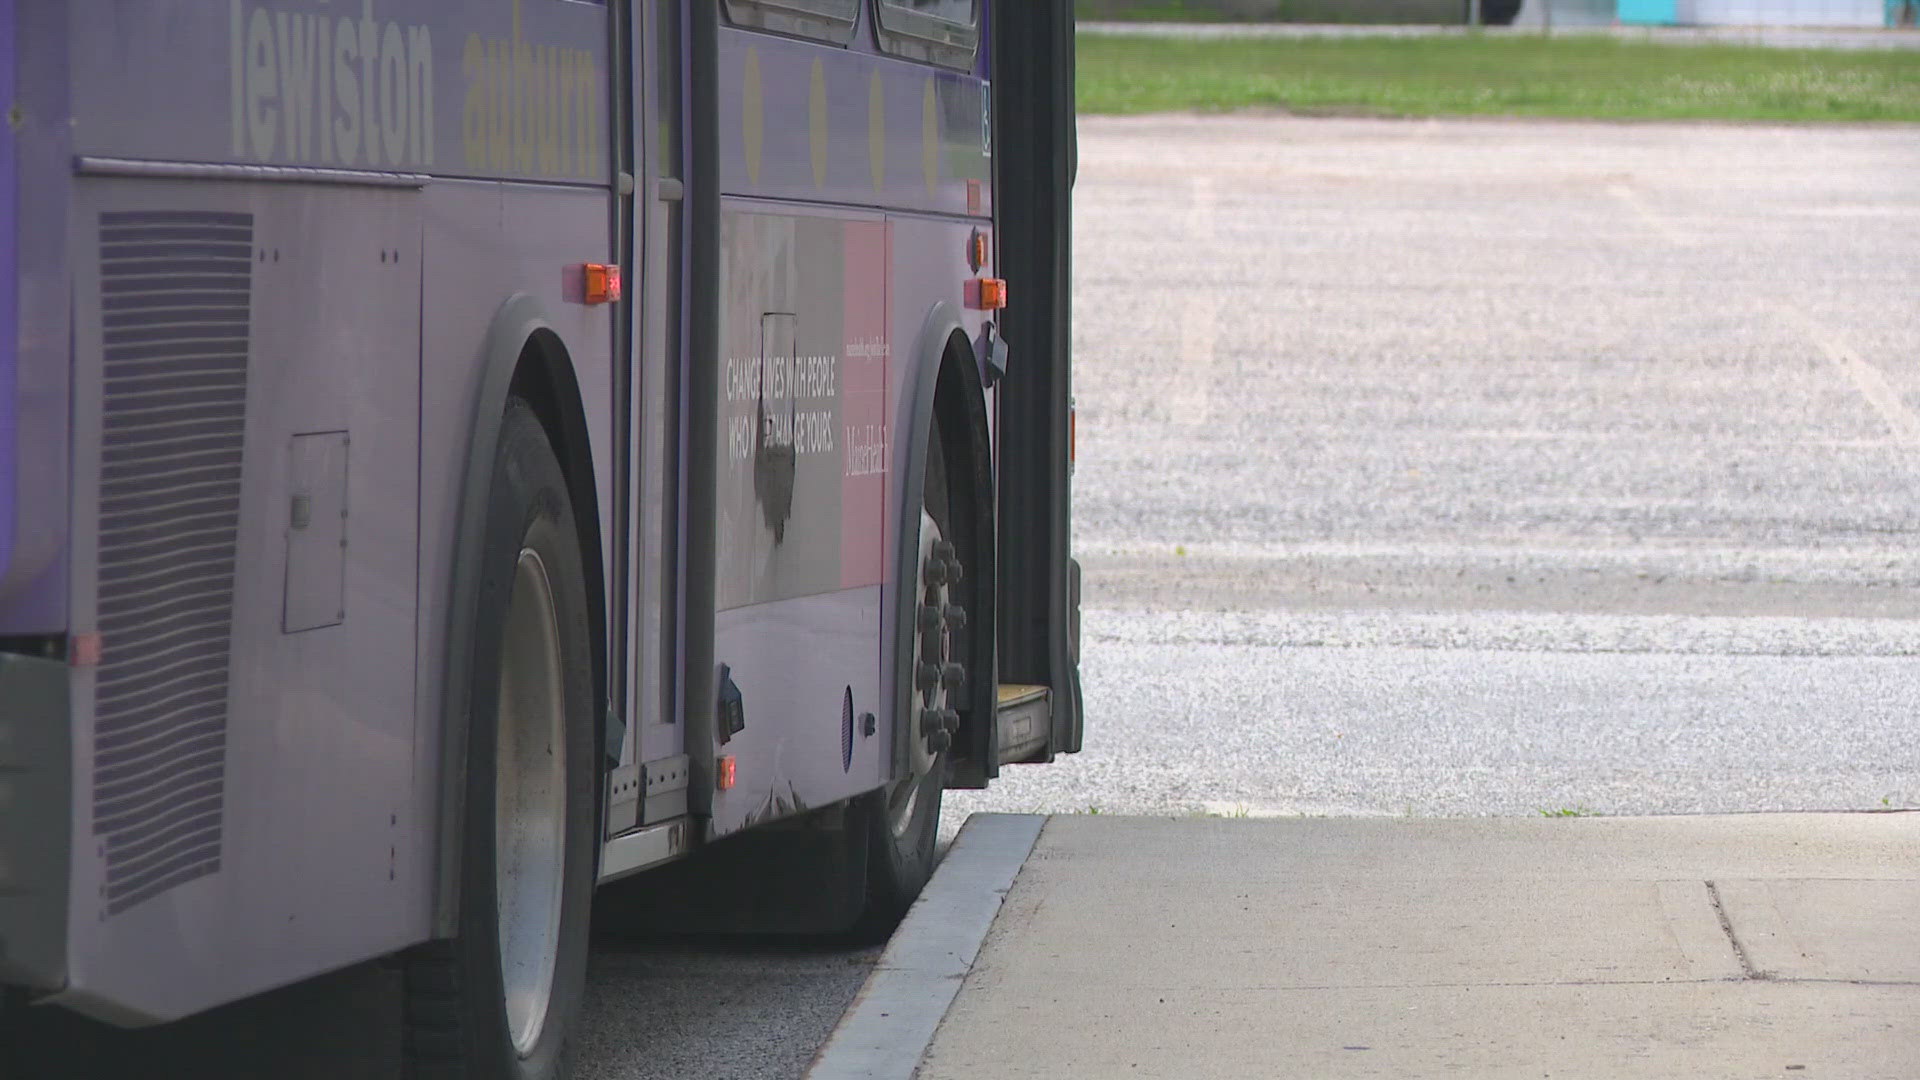 The department announced on Tuesday it contracted a Utah-based company to run a pilot program for two years for $2.8 million, filling a public transit void.